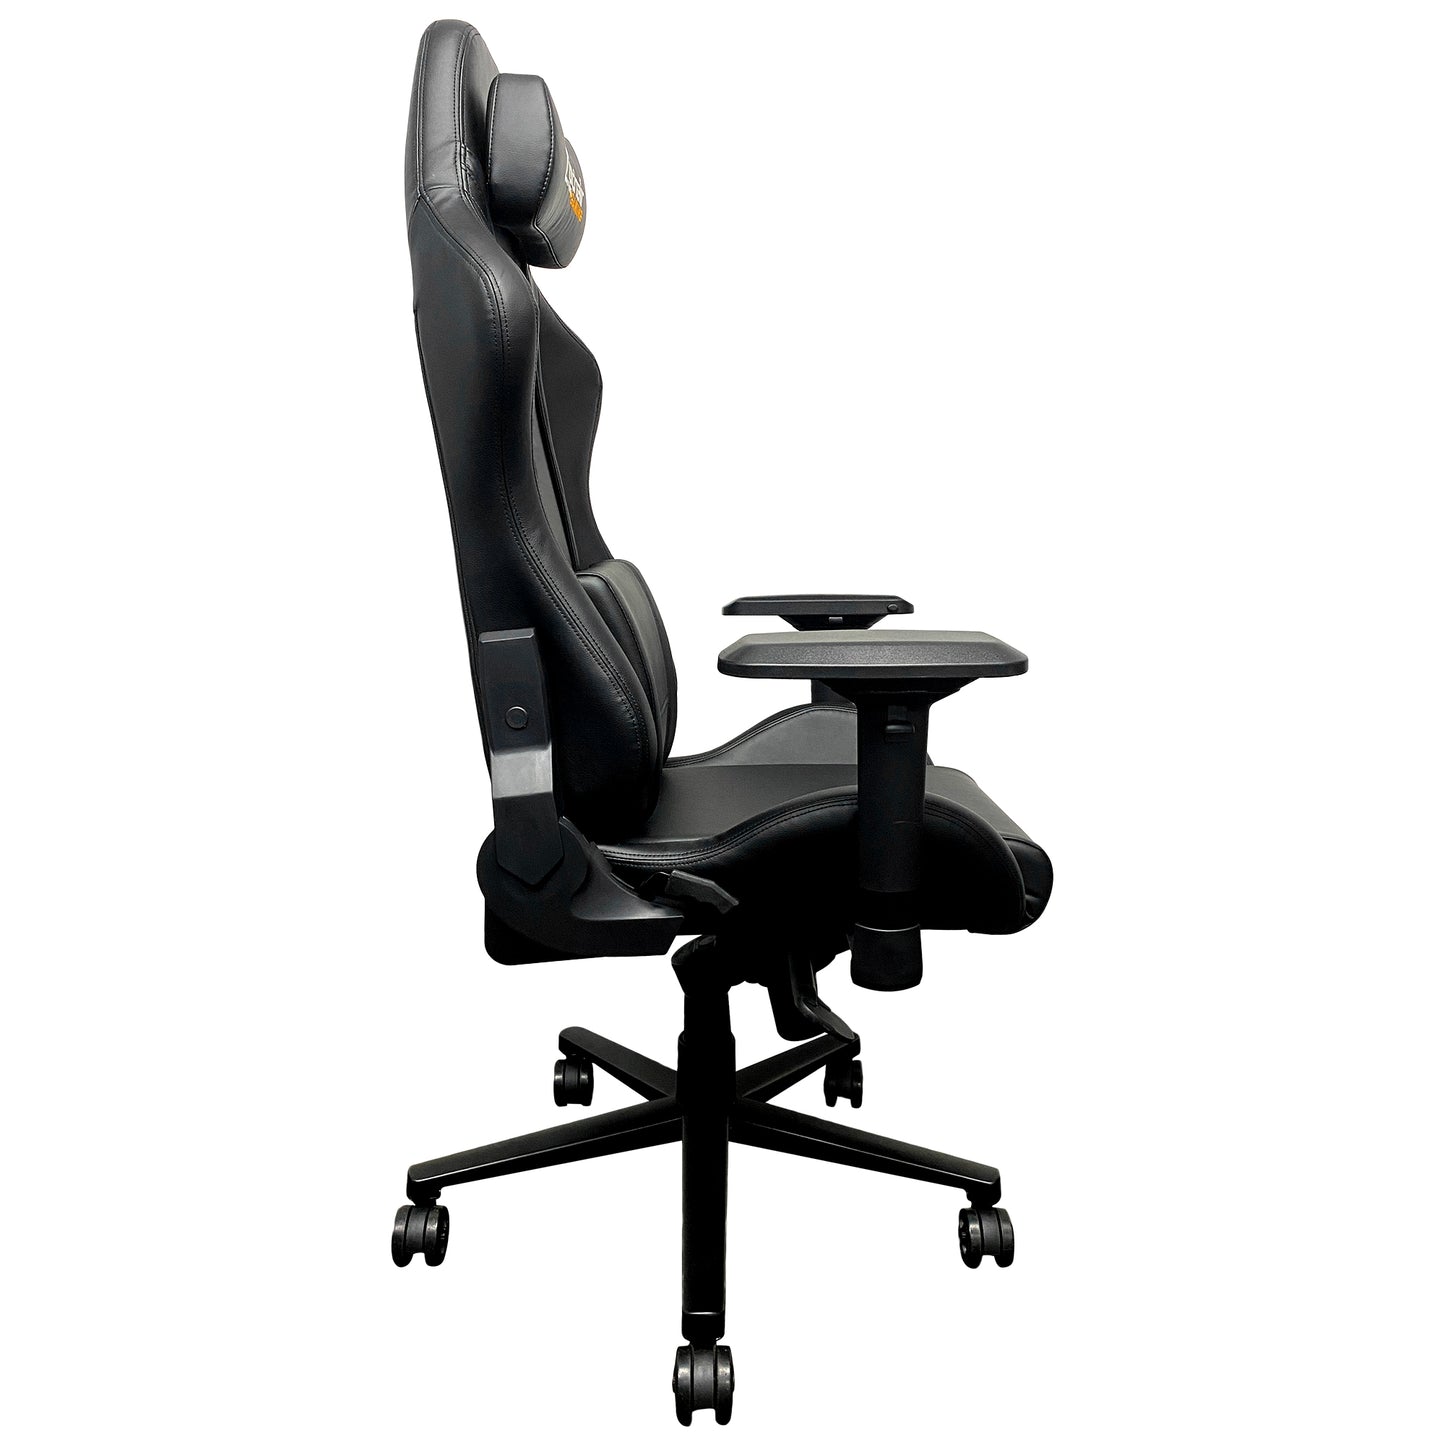 Xpression Pro Gaming Chair with New Orleans Pelicans NOLA Logo